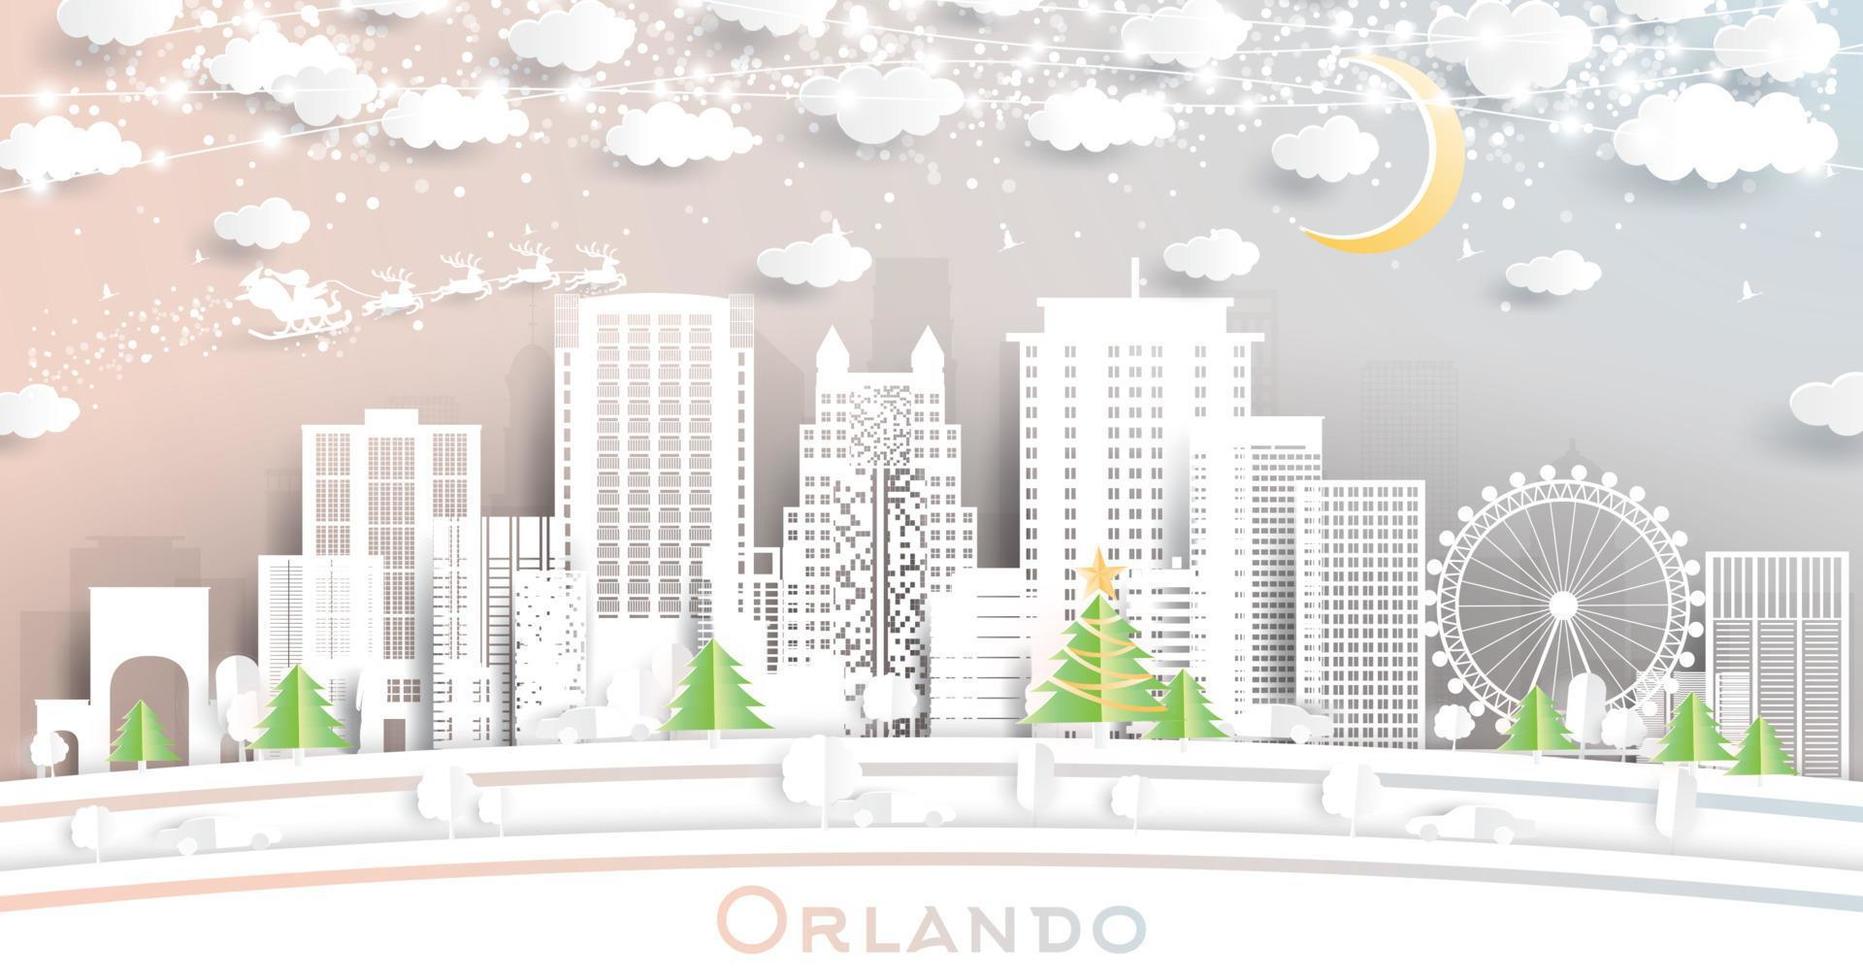 Orlando Florida USA City Skyline in Paper Cut Style with Snowflakes, Moon and Neon Garland. vector